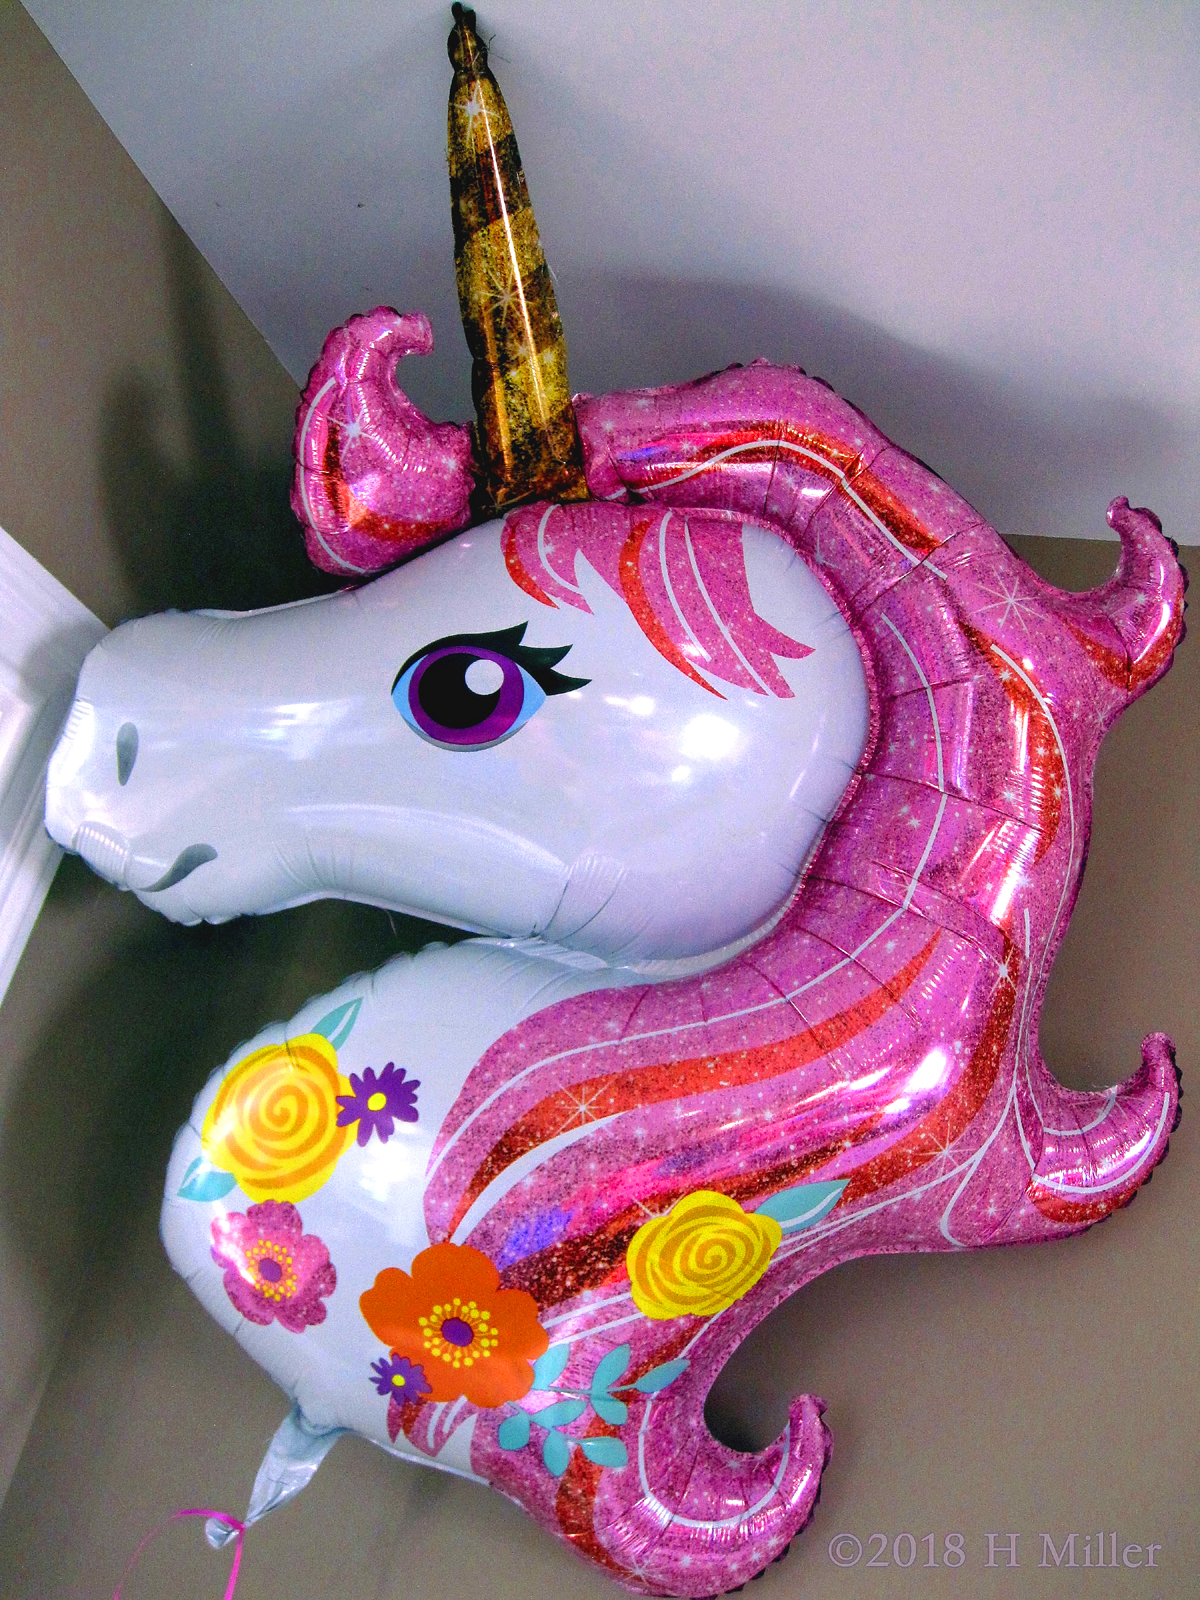 Kids Love Unicorns And Balloons, So Why Not Have A Unicorn Balloon! 